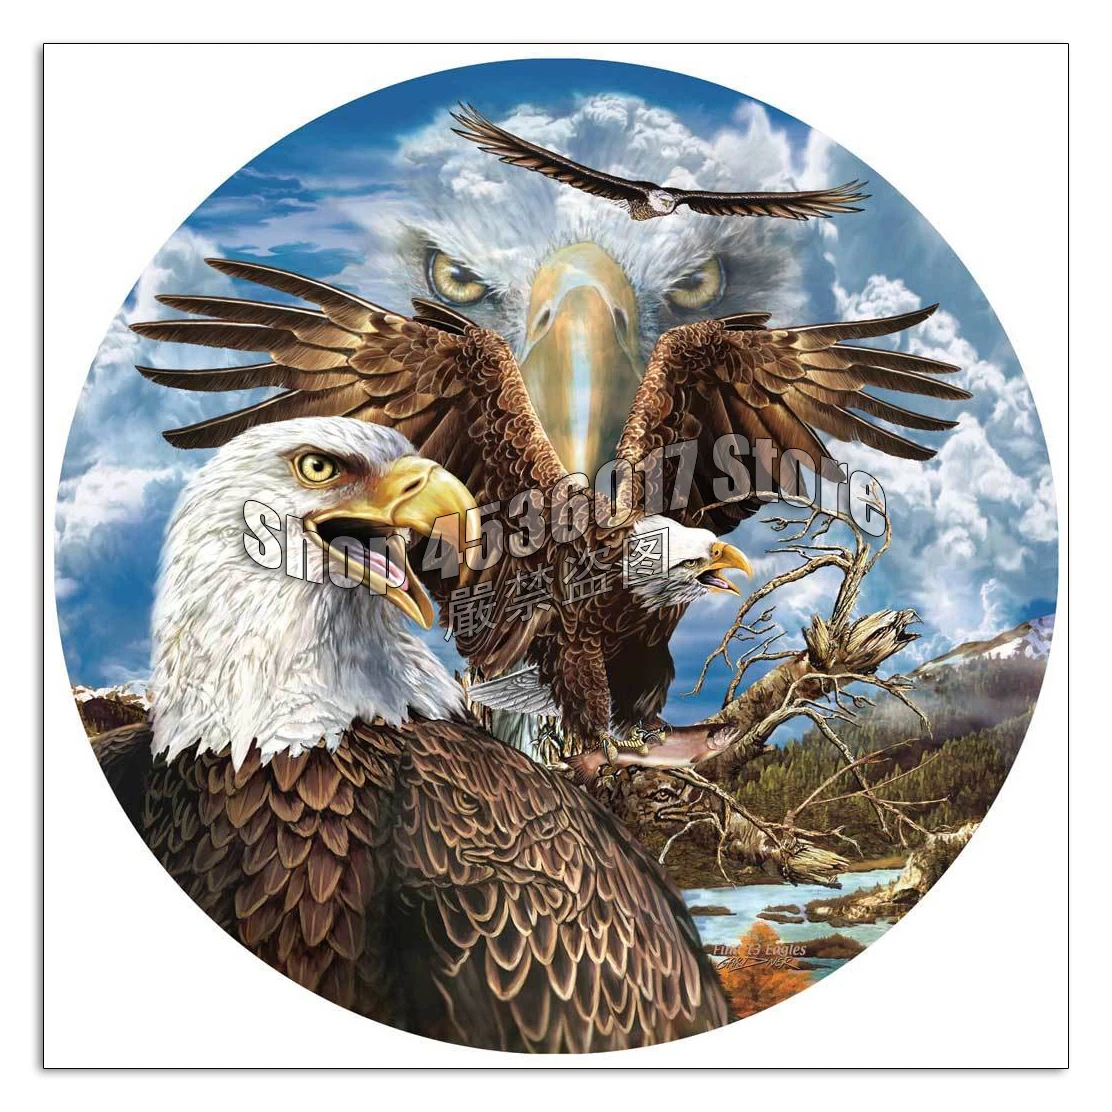 

Animals Eagles 5D DIY Diamond Painting by numbers Full Embroidery Mosaic cross stitch kits Home decoration pintura de diamante